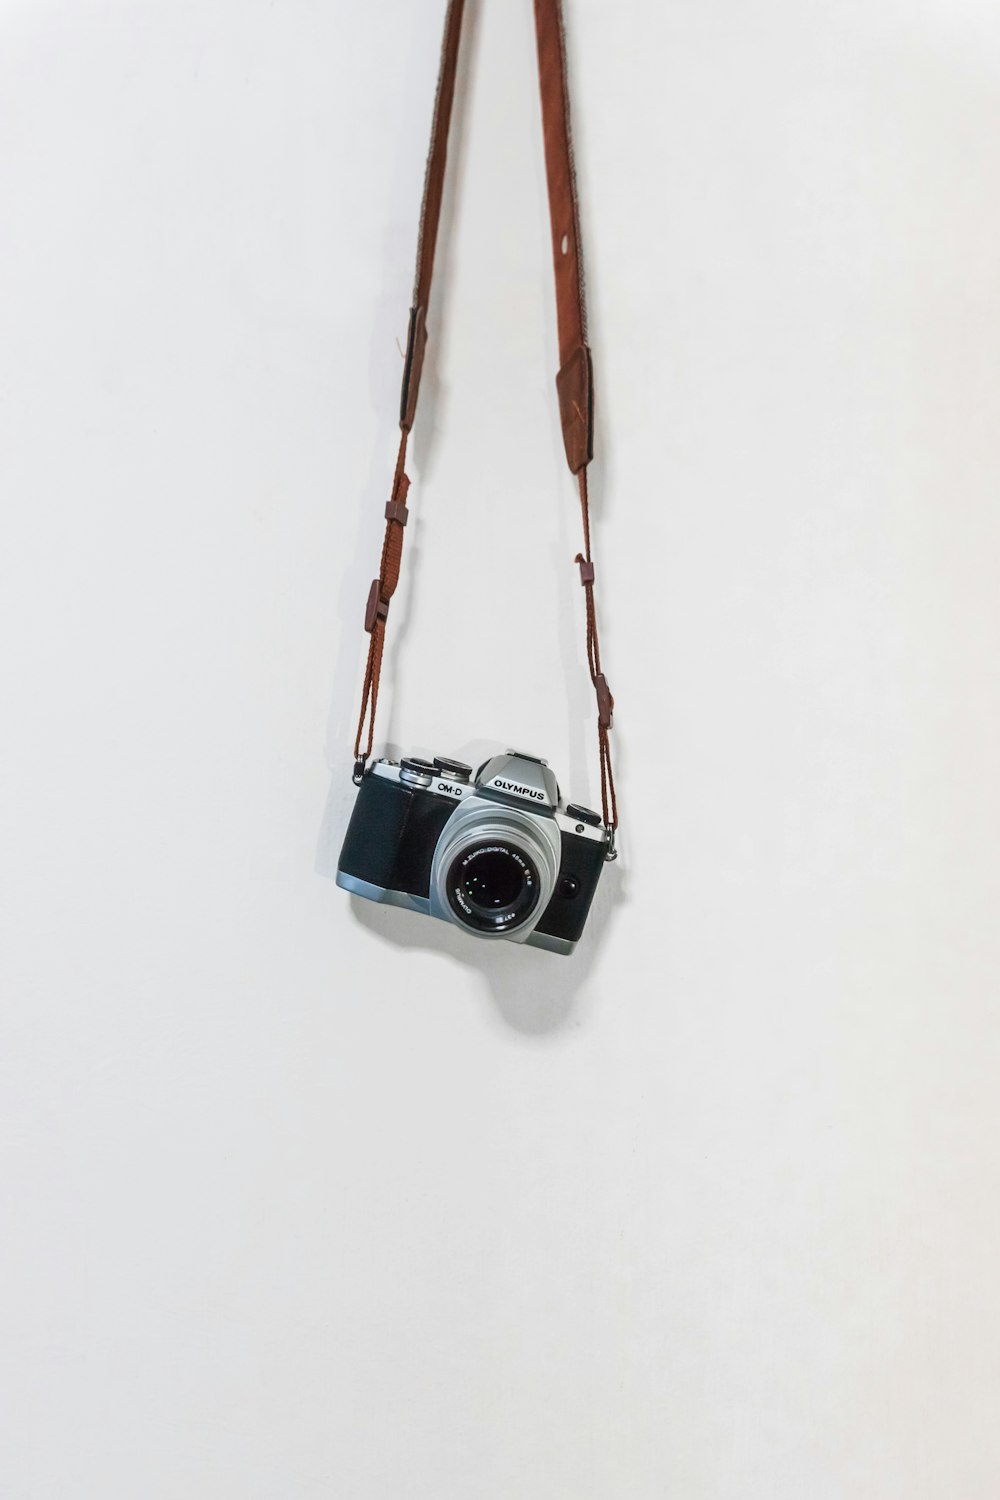 black and silver camera hanging on brown rope